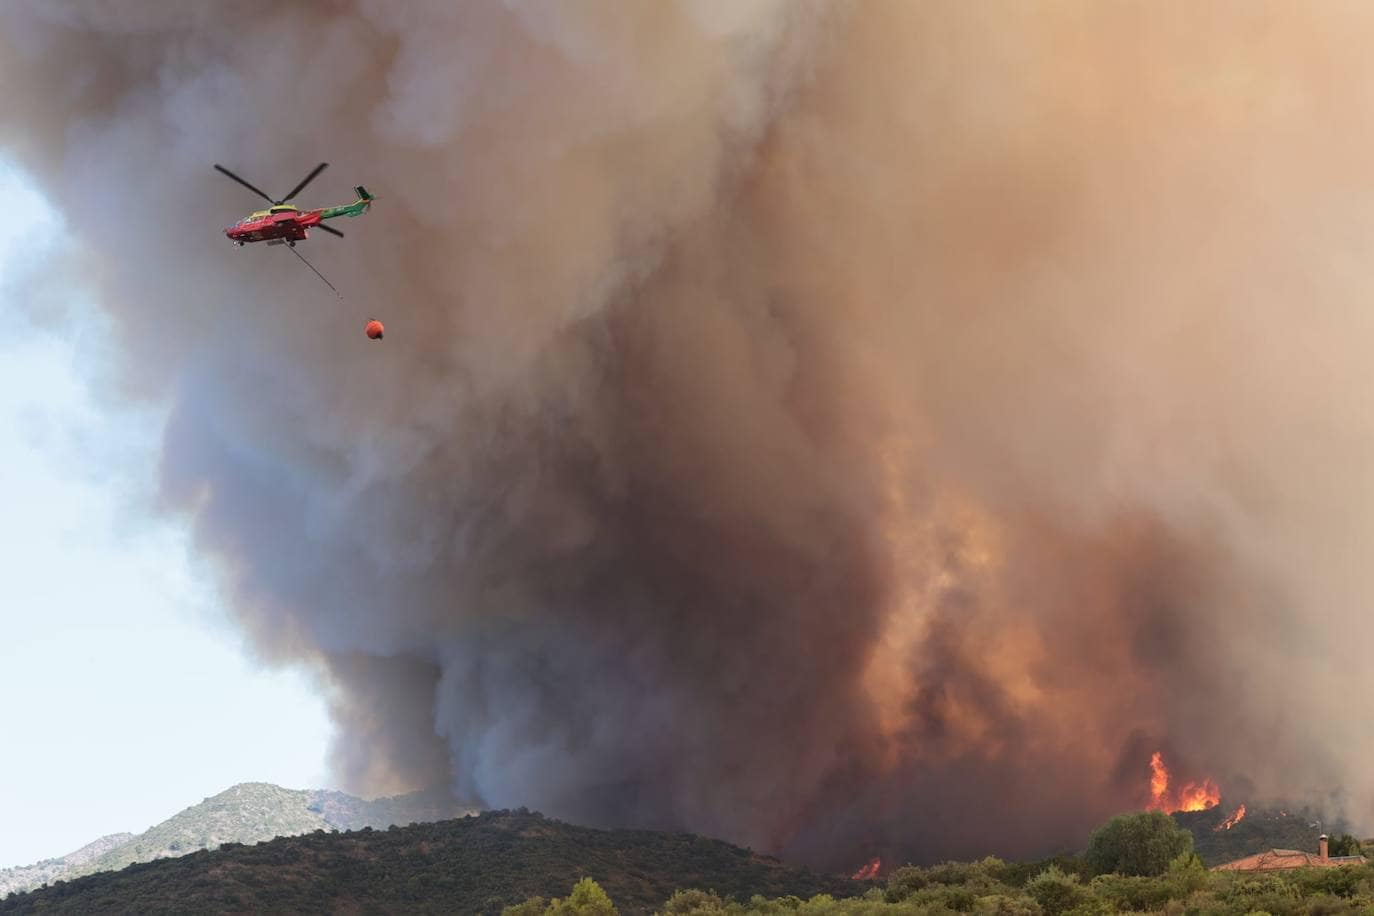 Almost 1,000 hectares affected by forest fire that started in the Sierra de Mijas